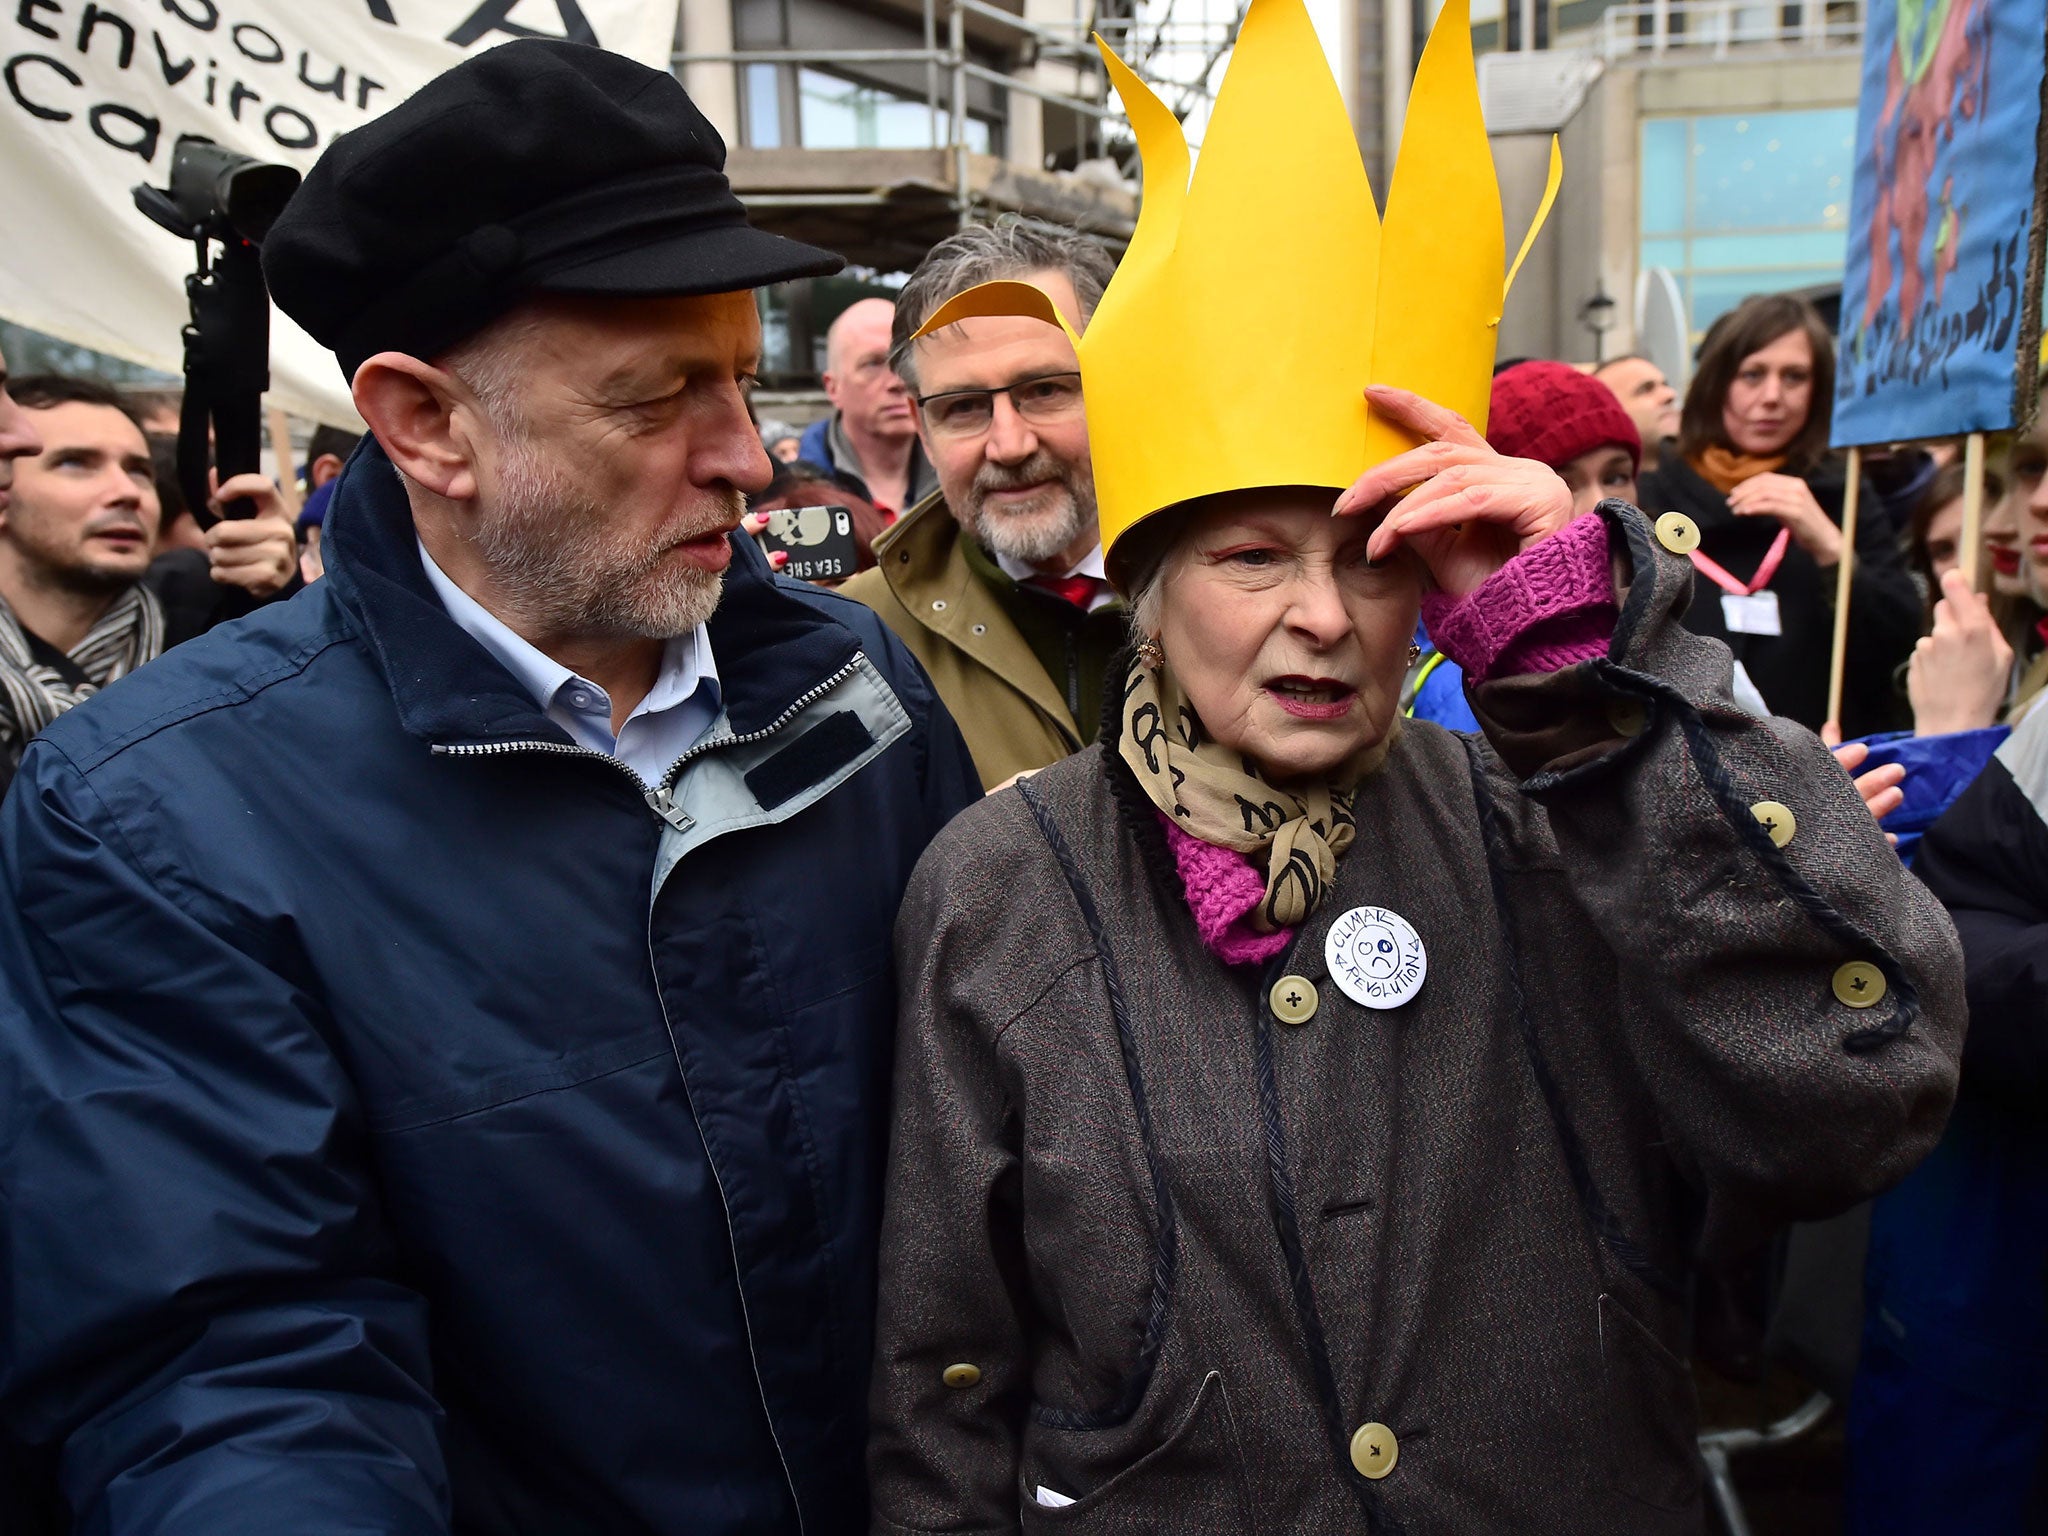 Jeremy Corbyn and Dame Vivienne Westwood join campaigners in London calling for action on climate change